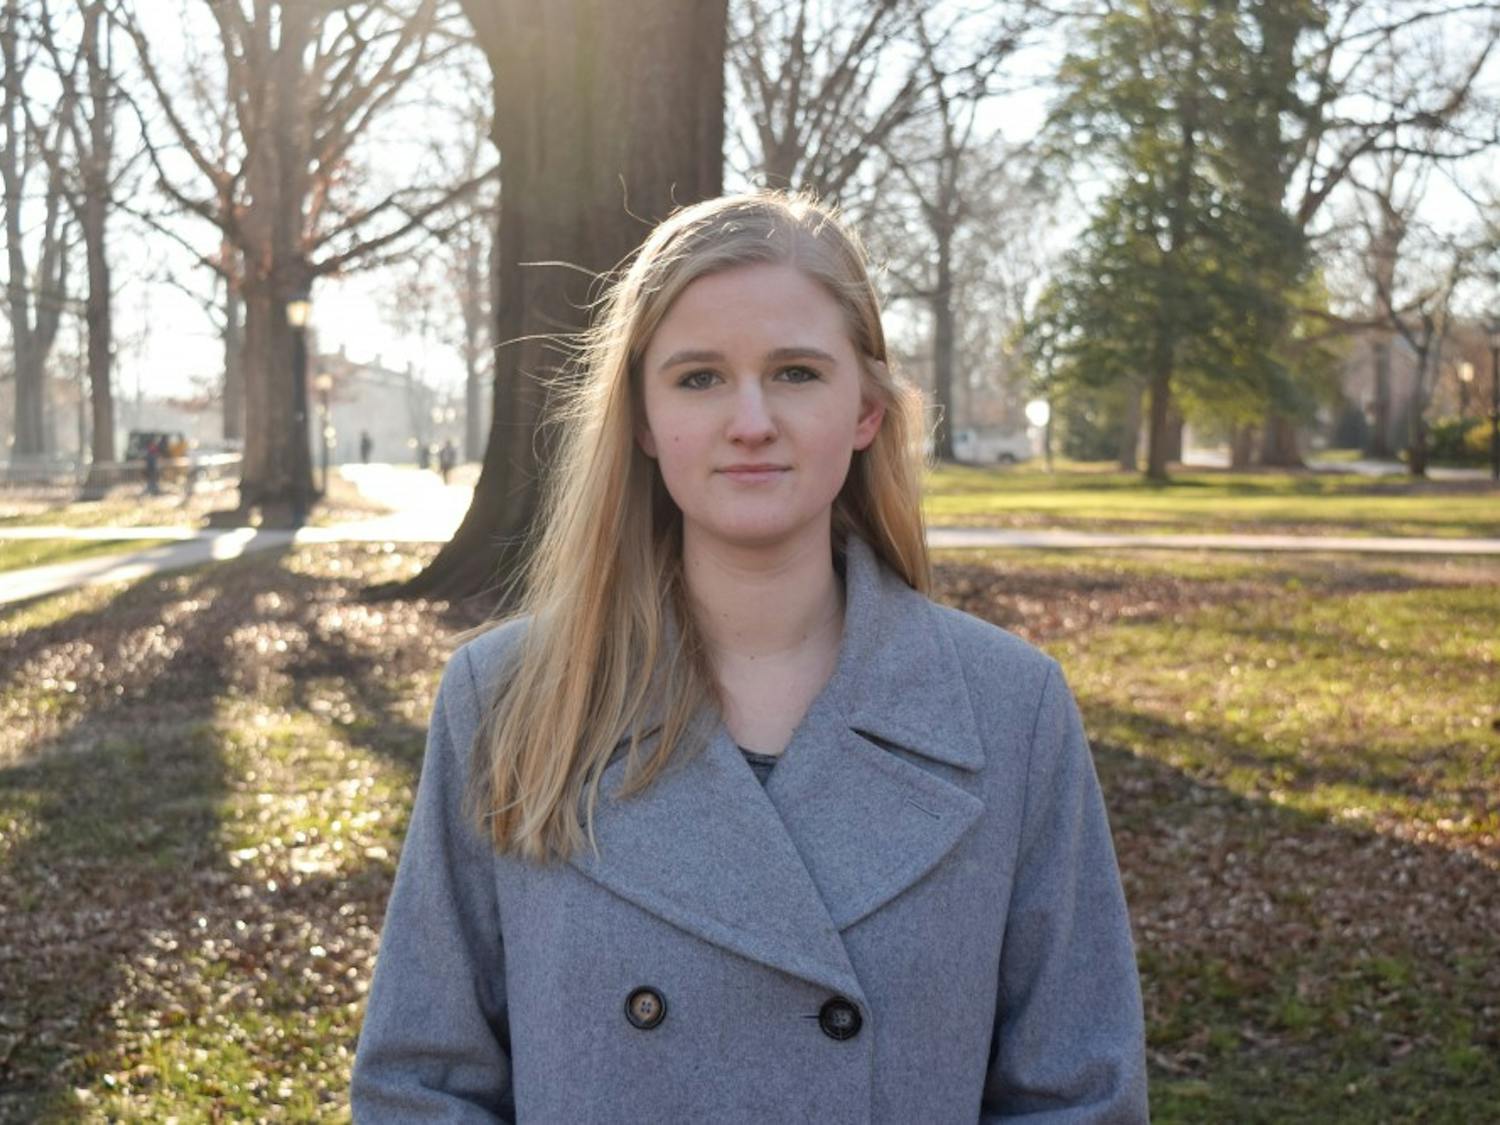 Valerie Lundeen, a third year studying Economics and Public Policy, is one of the many students affected by the partial government shutdown. Parents of many student are not able to go in to work for an uncertain period of time after Trump's decision to temporarily close down government functions.